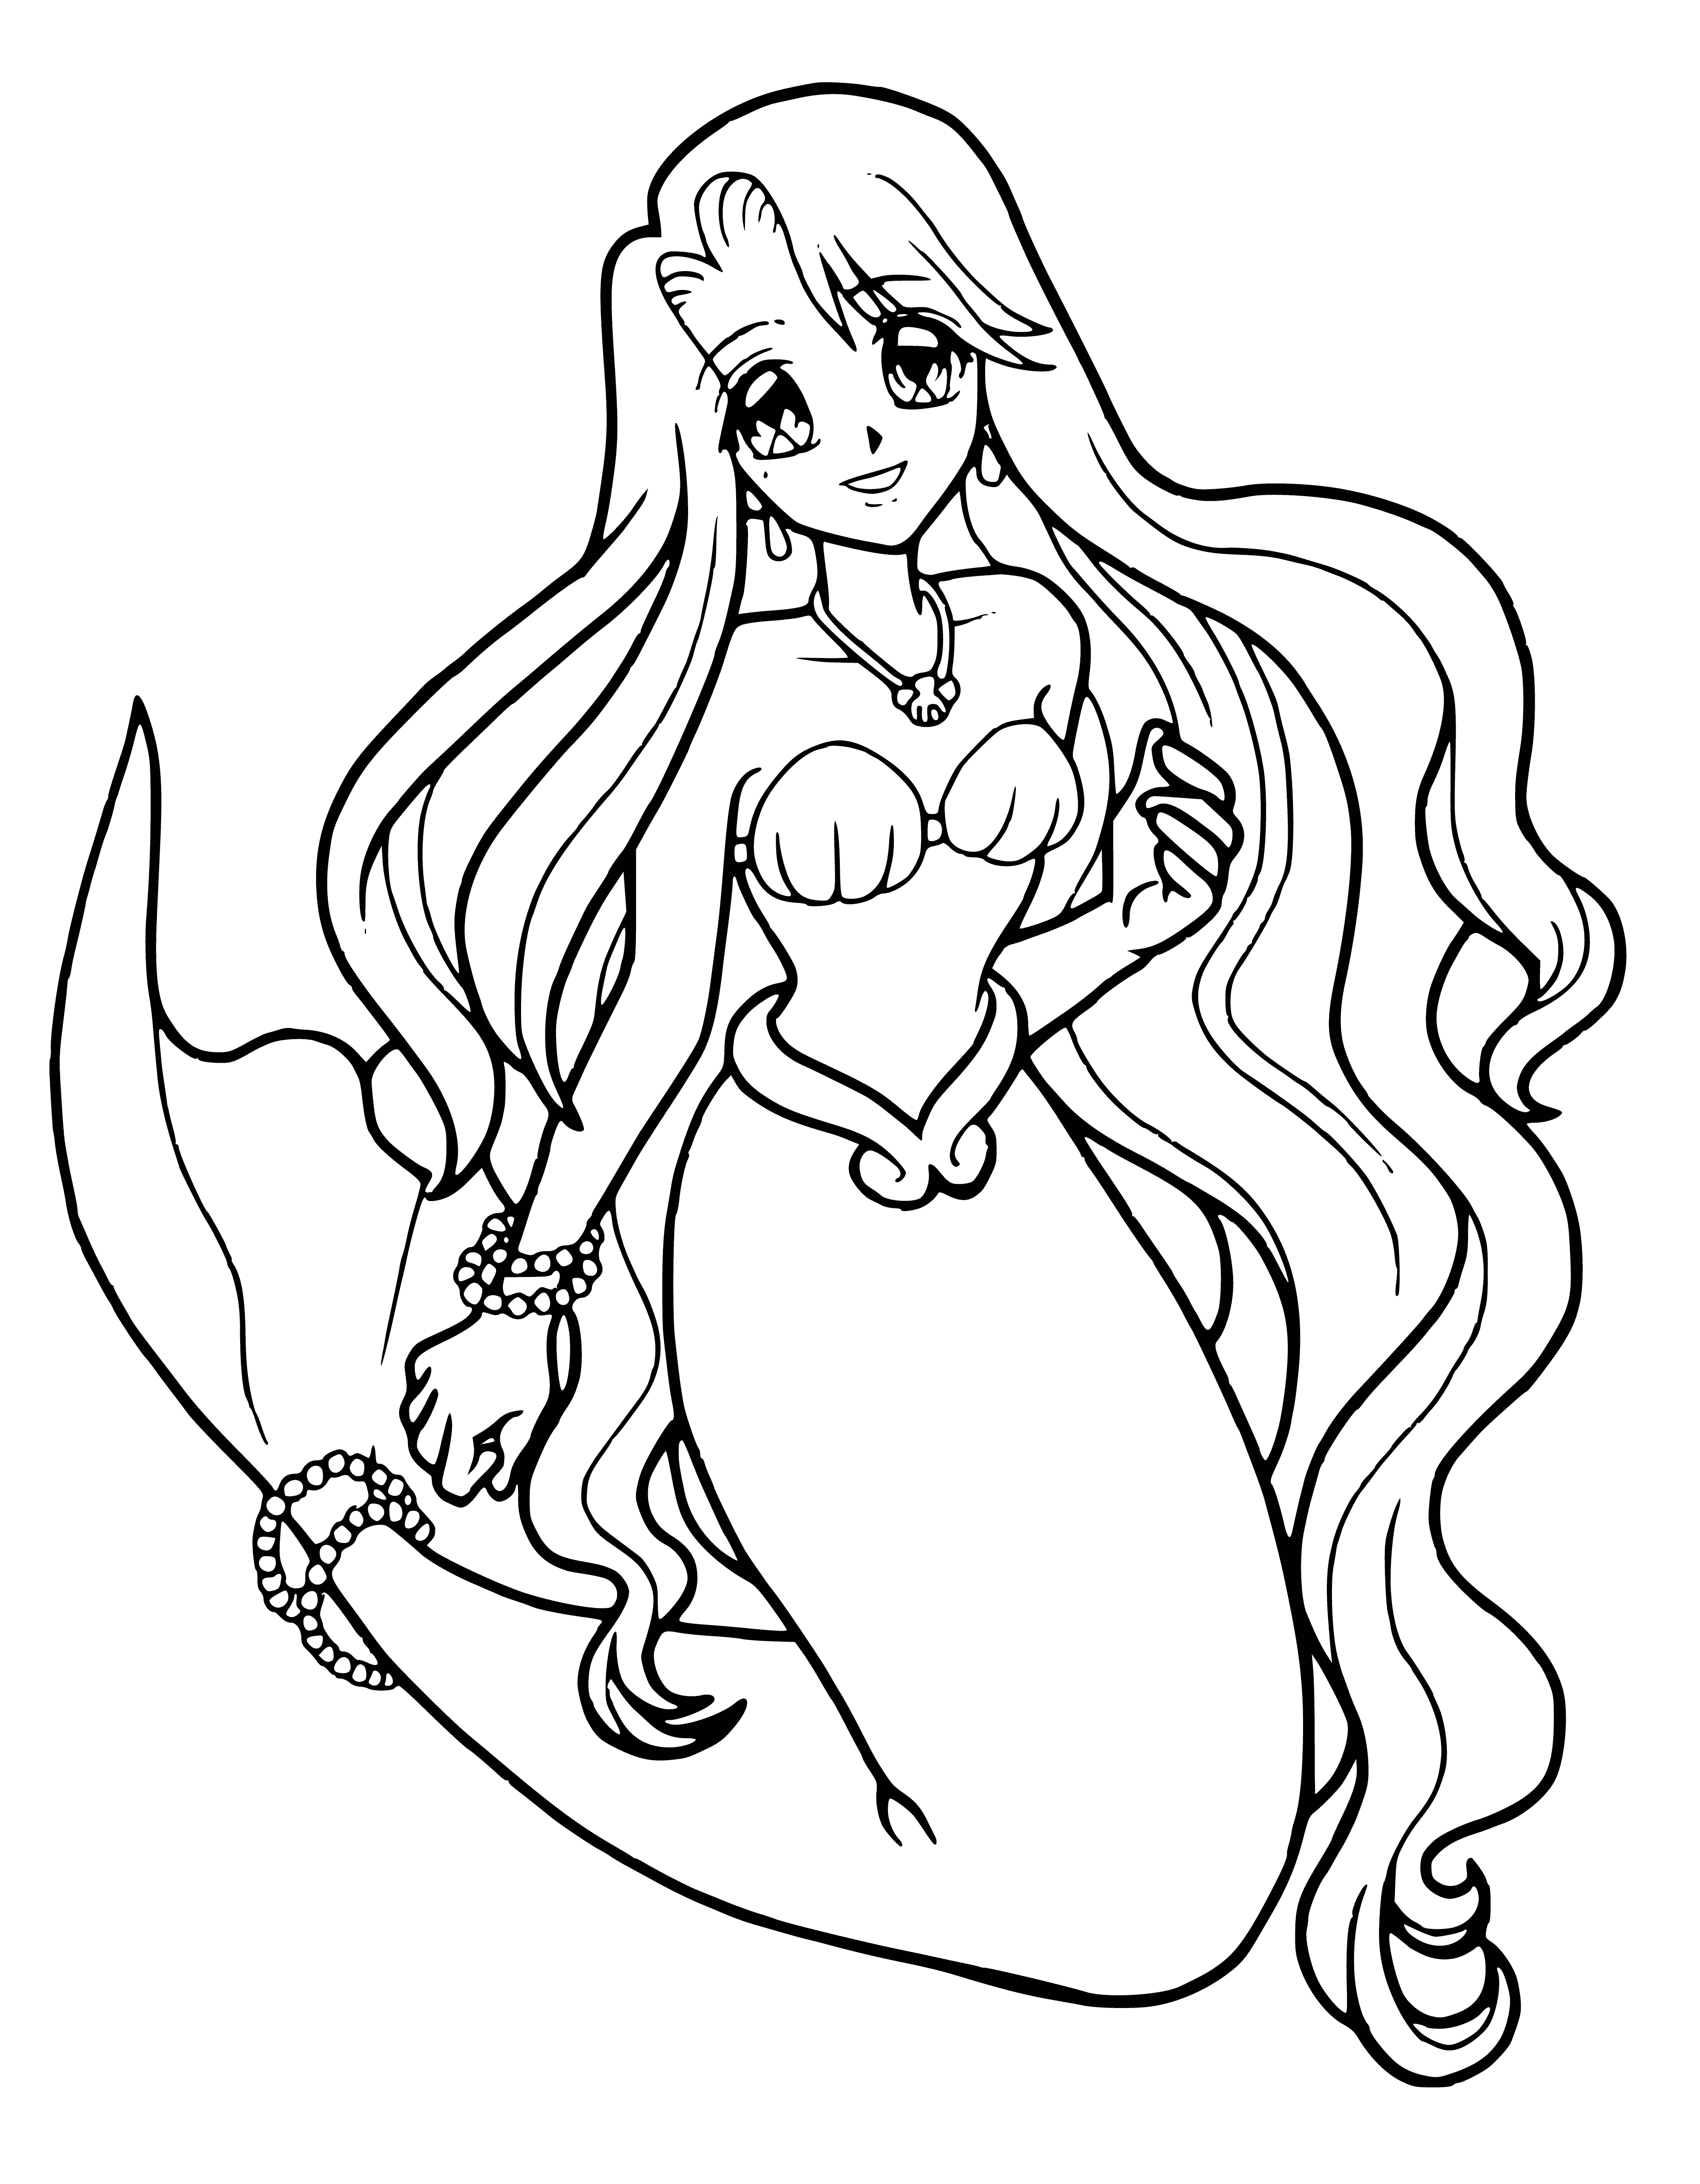 coloring page: Mermaid with long, flowing hair in shades of blue and green, slim body, pale skin, beautiful face, deep piercing eyes, and shimmering finned tail. Swims gracefully, captivating all who see her.